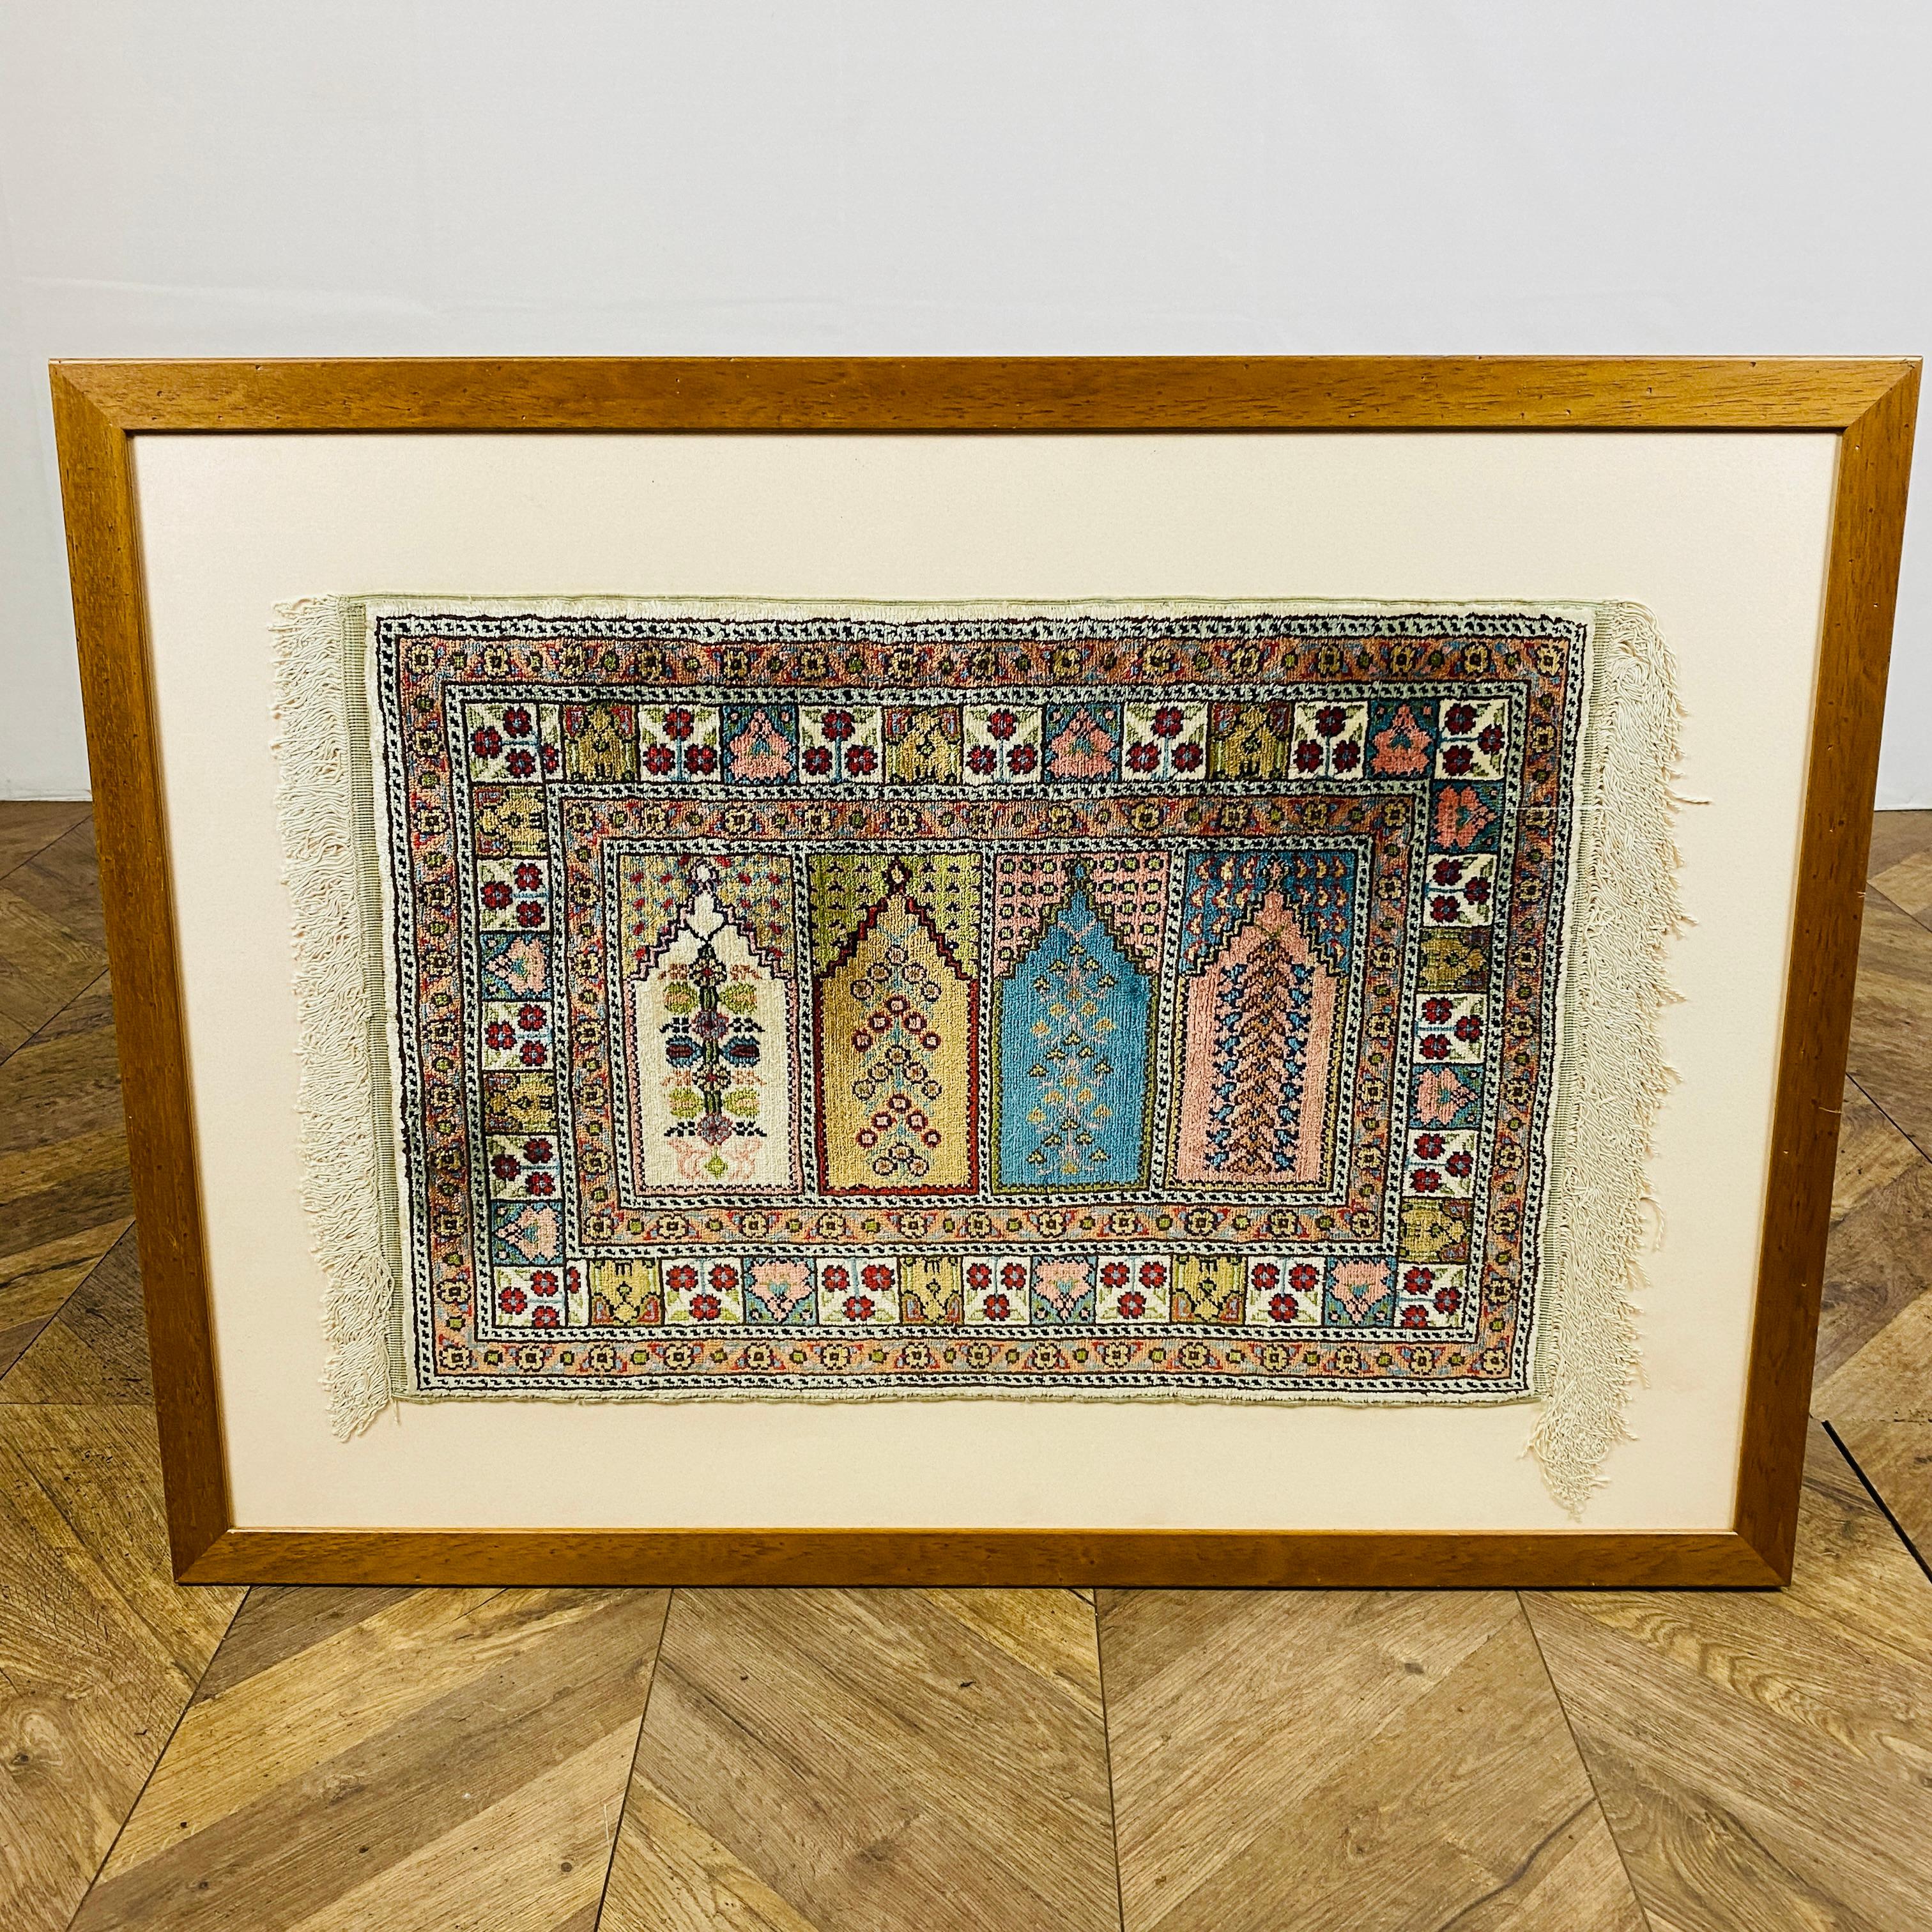 A Framed & Glazed Small Persian Rug, Made from Finely Knotted Silk.

These small rug could have been used by rug salesman to showcase designs and quality before production.

The frame is a good size and in good vintage condition.